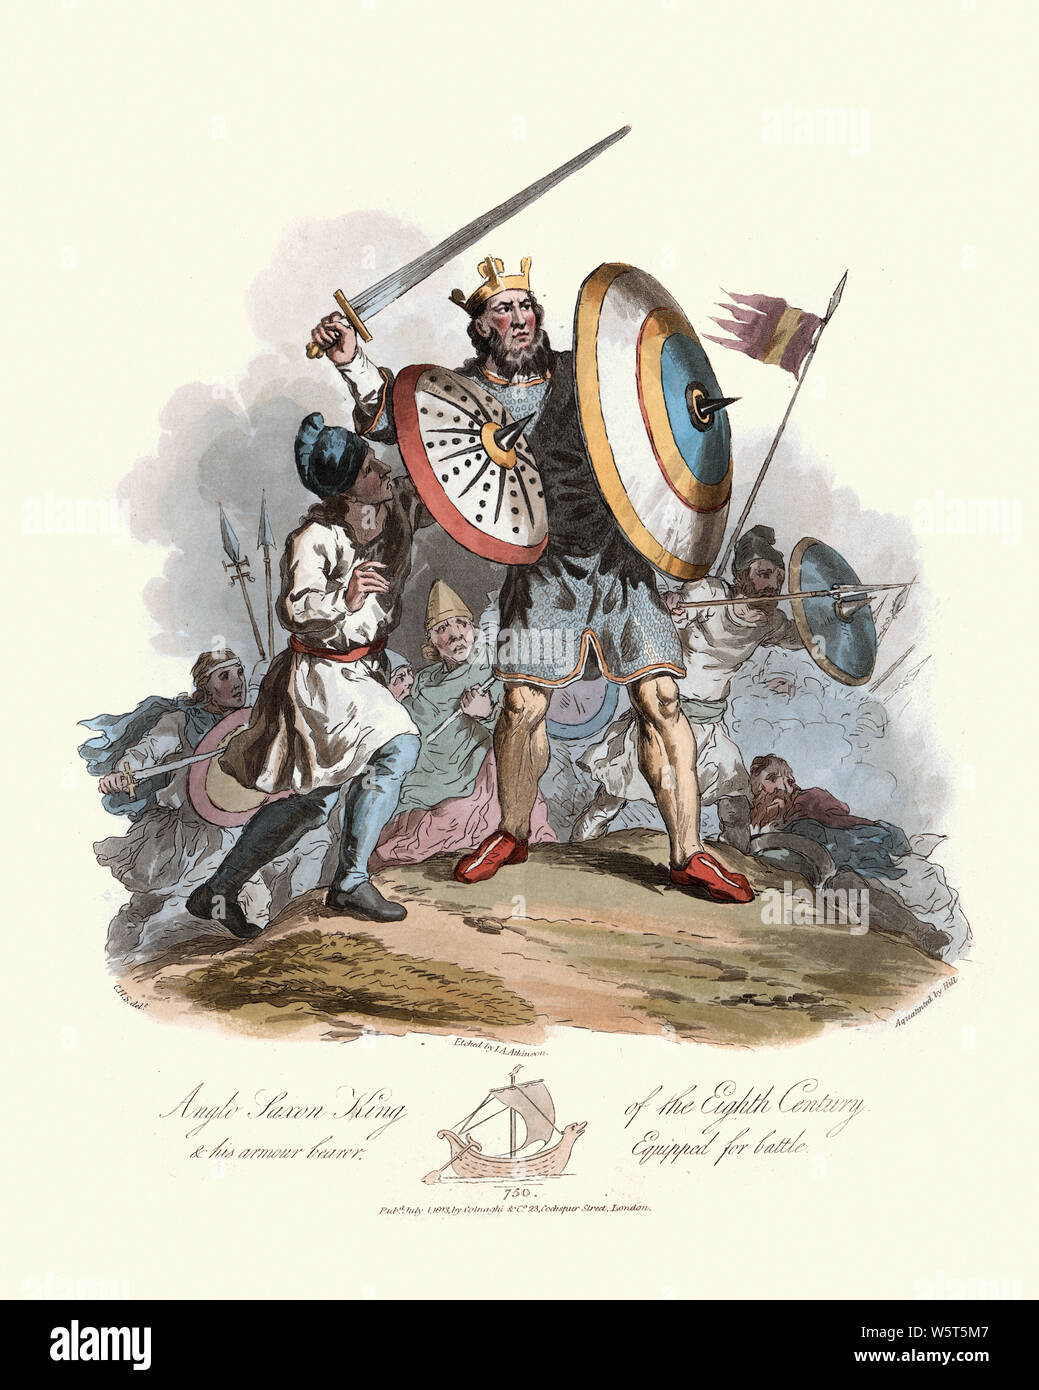 Vintage engraving of Anglo Saxon King of the 8th Century and his armour bearer equipped for battle. Sword and round shield with chainmail surcoat, pro Stock Photo